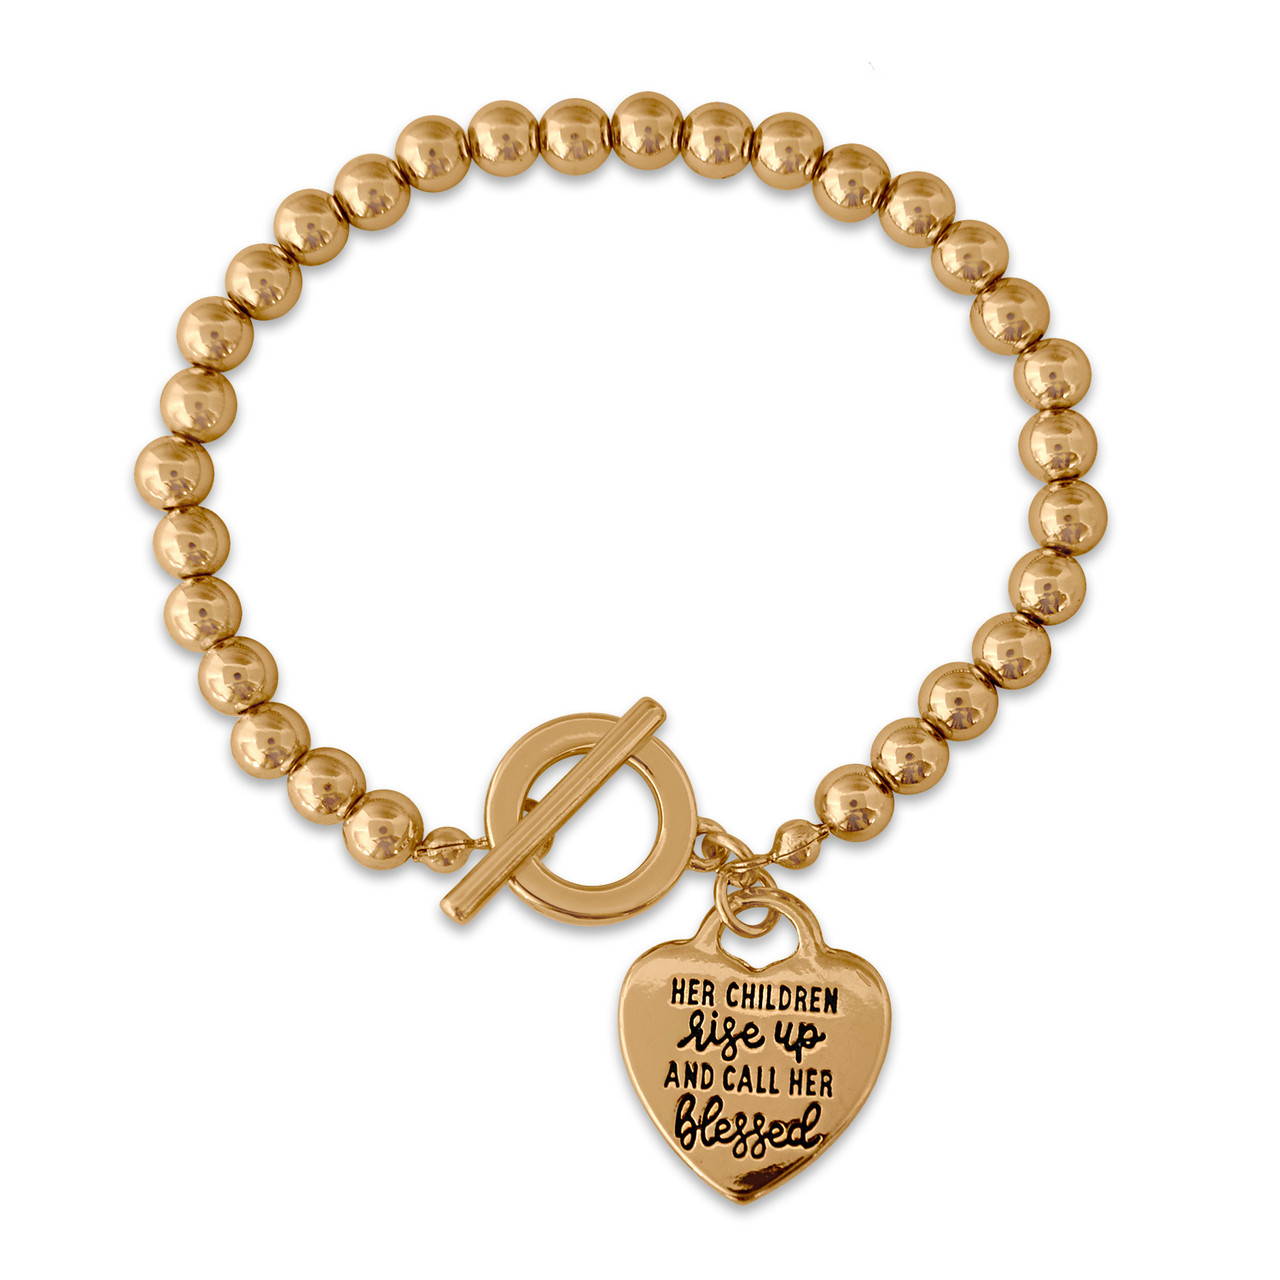 Her Children Rise Up and Call Her Blessed Gold Toggle Bracelet